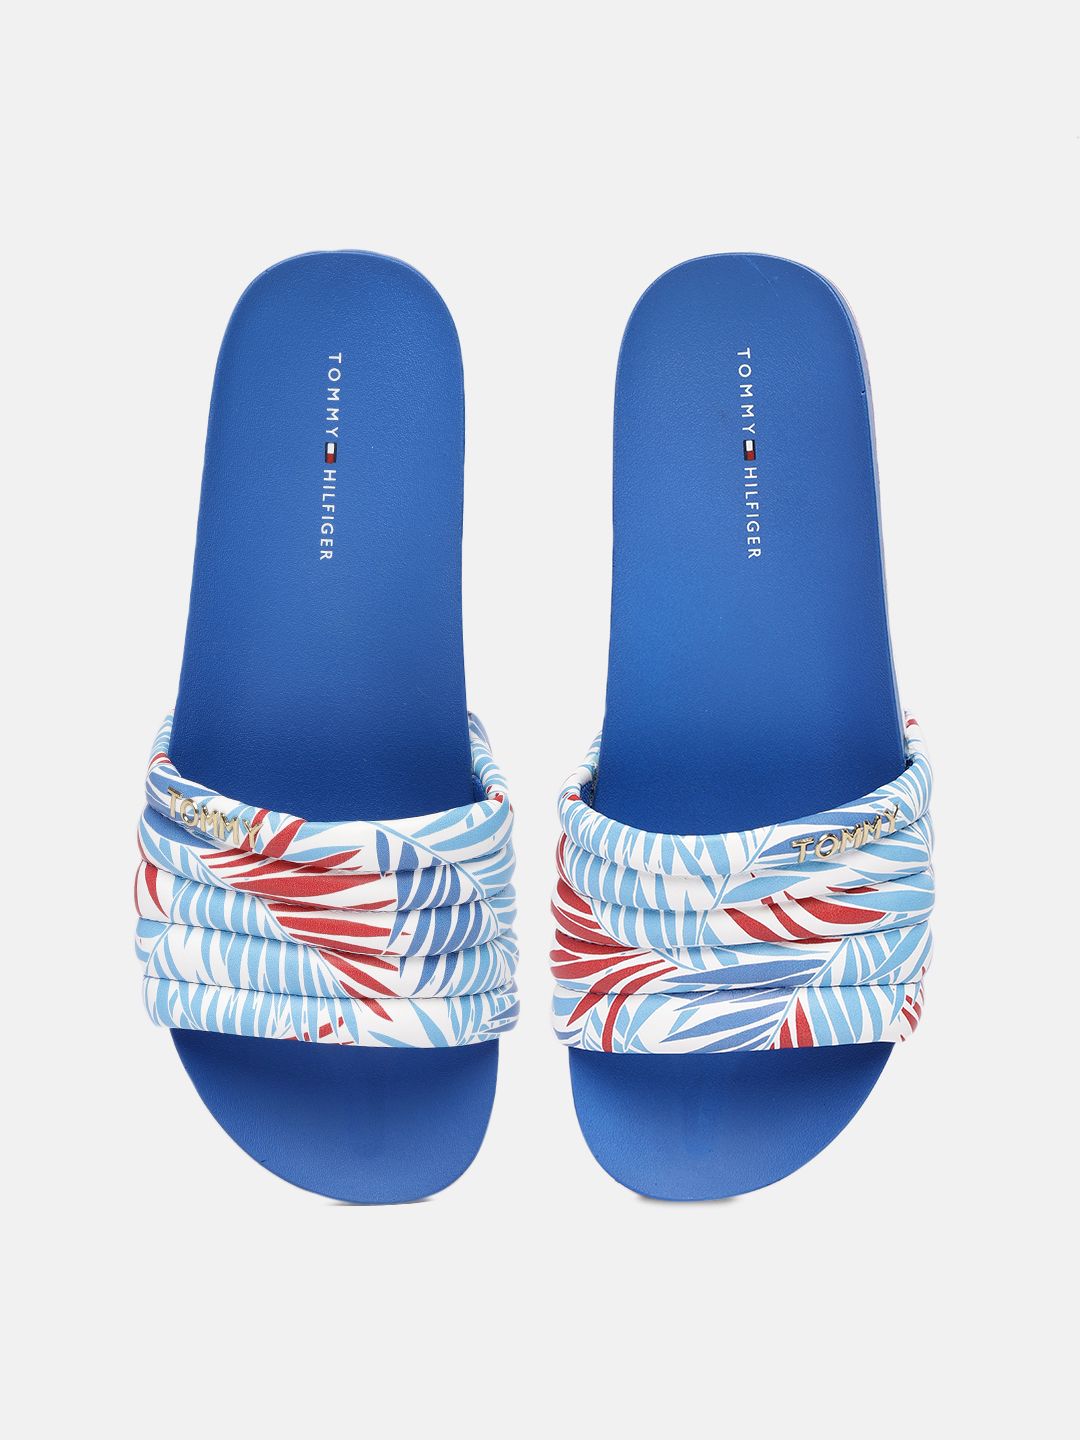 Tommy Hilfiger Women Blue & White Printed Sliders Price in India